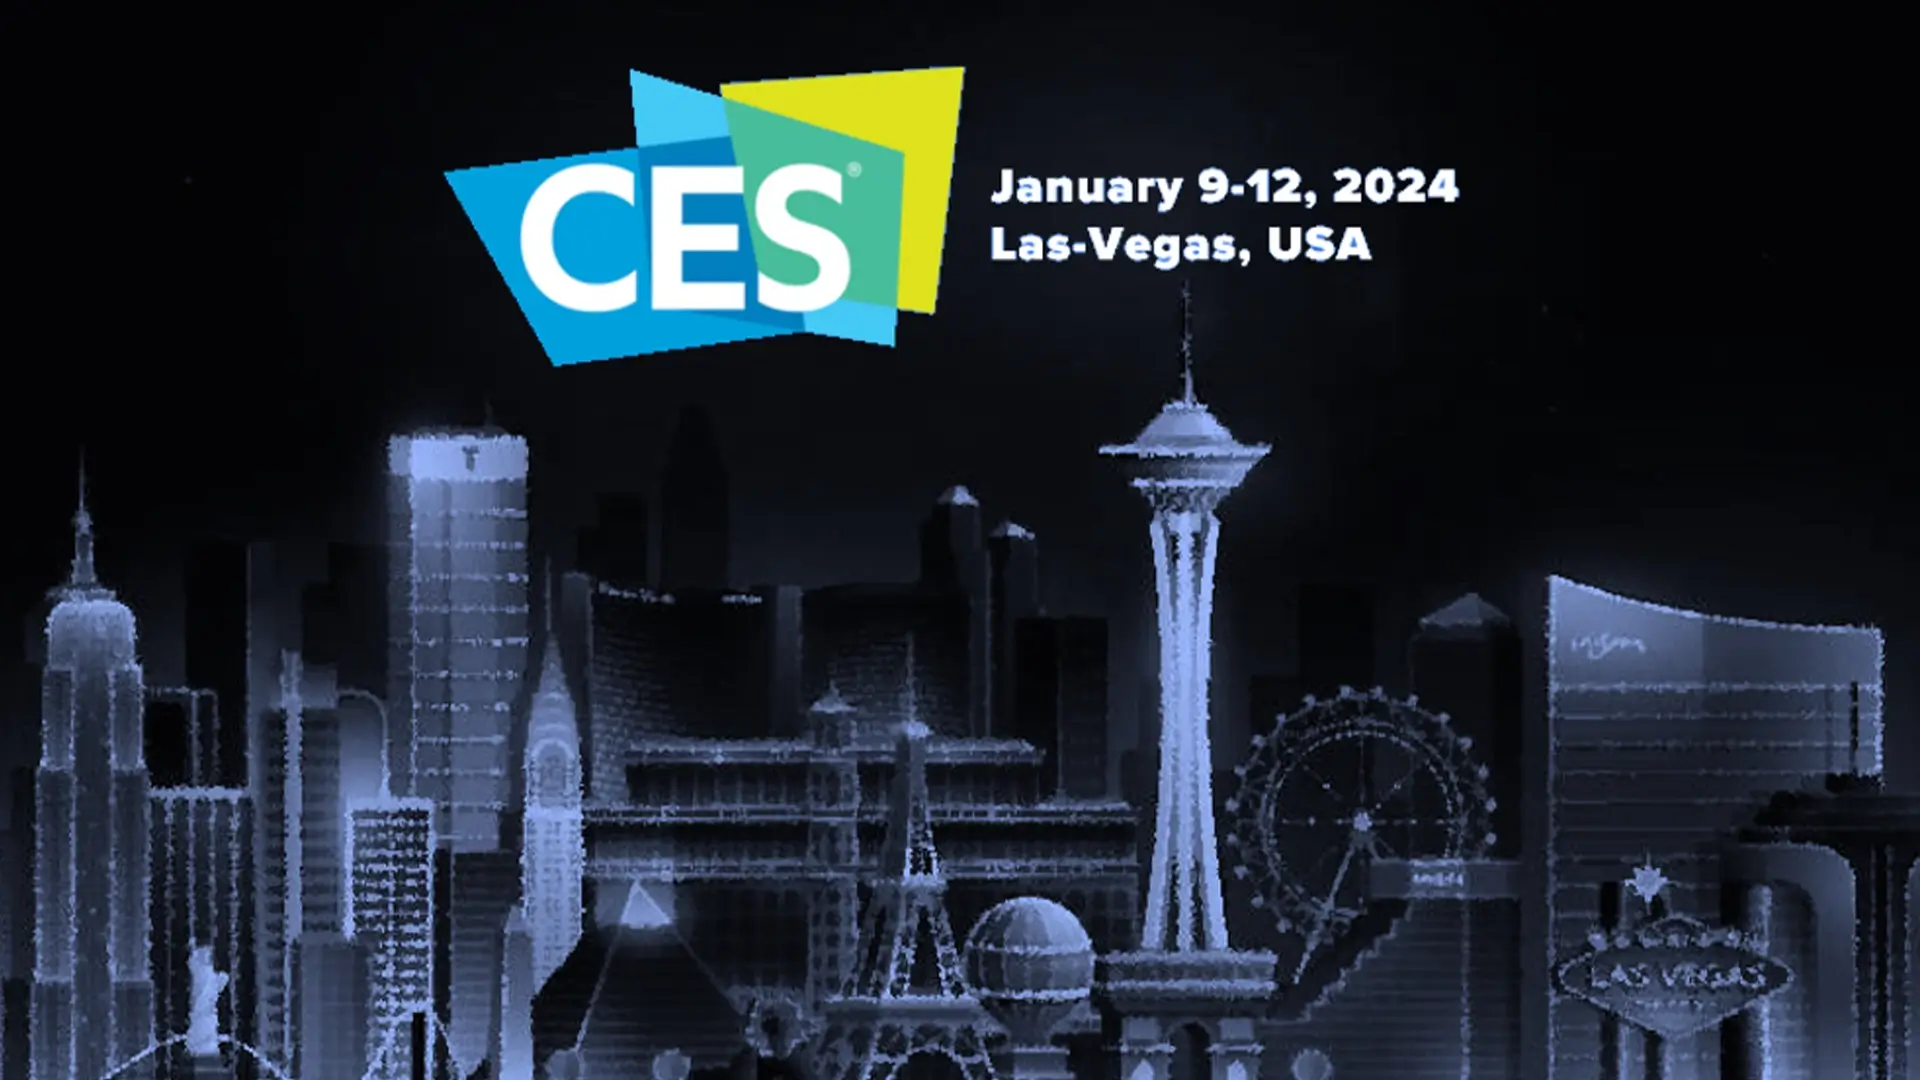 CES 2024 Poster